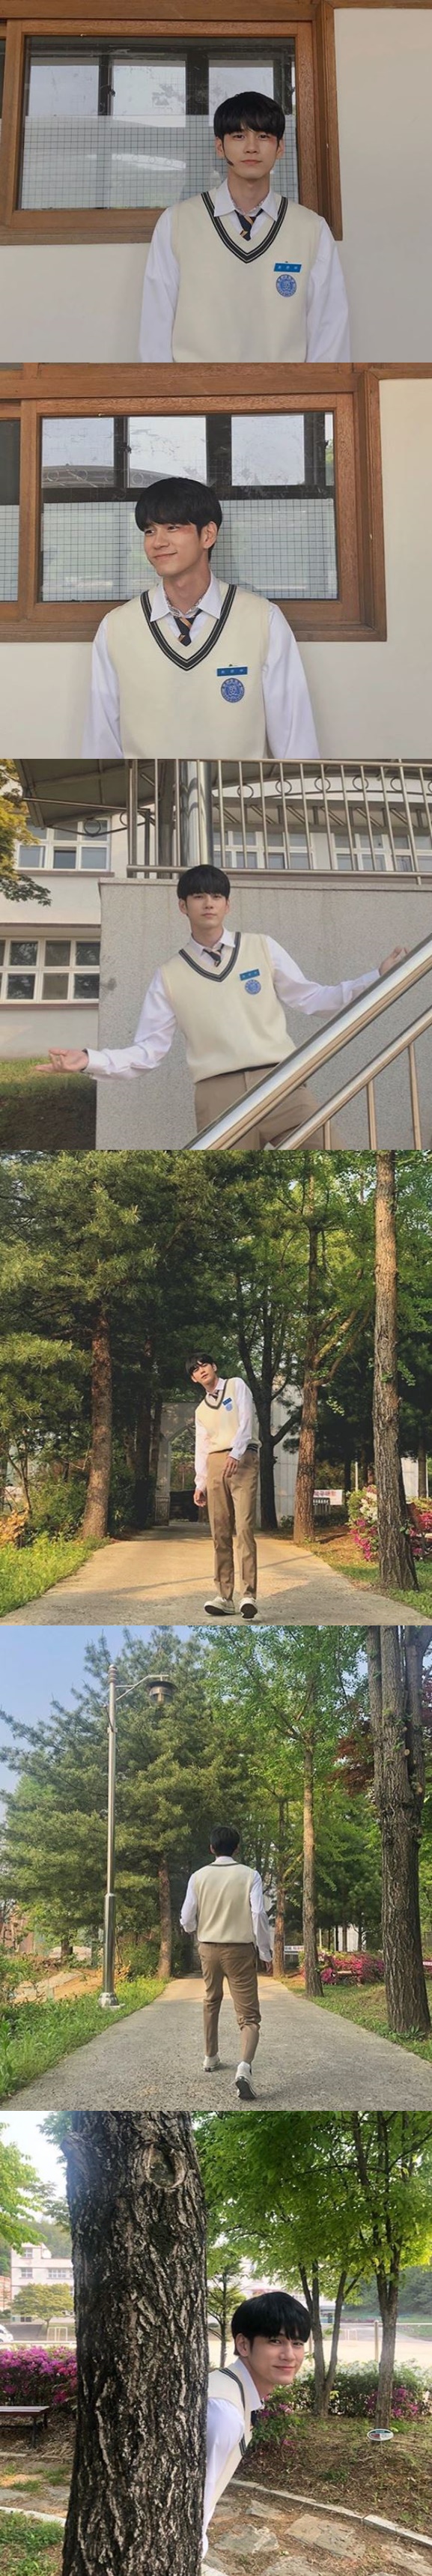 Wanna Ones recent on-ring Seong-woo has been revealed and attracted attention.On the 2nd, Ong Seong-wu released a picture on his instagram with the message The moment of the hospital.The photo shows JTBC Drama on the set of Eighteen Moments, starring Ong Seong-wu.Ong Seong-wu, who plays the role of the character Choi Jun-woo in the play, caught the eye by boasting a warm-hearted visual from various angles.On the other hand, JTBCs drama 18 Moments is an emotional youth drama that looks into the world of pre-youth, which is precarious and immature.Photo: Instagram